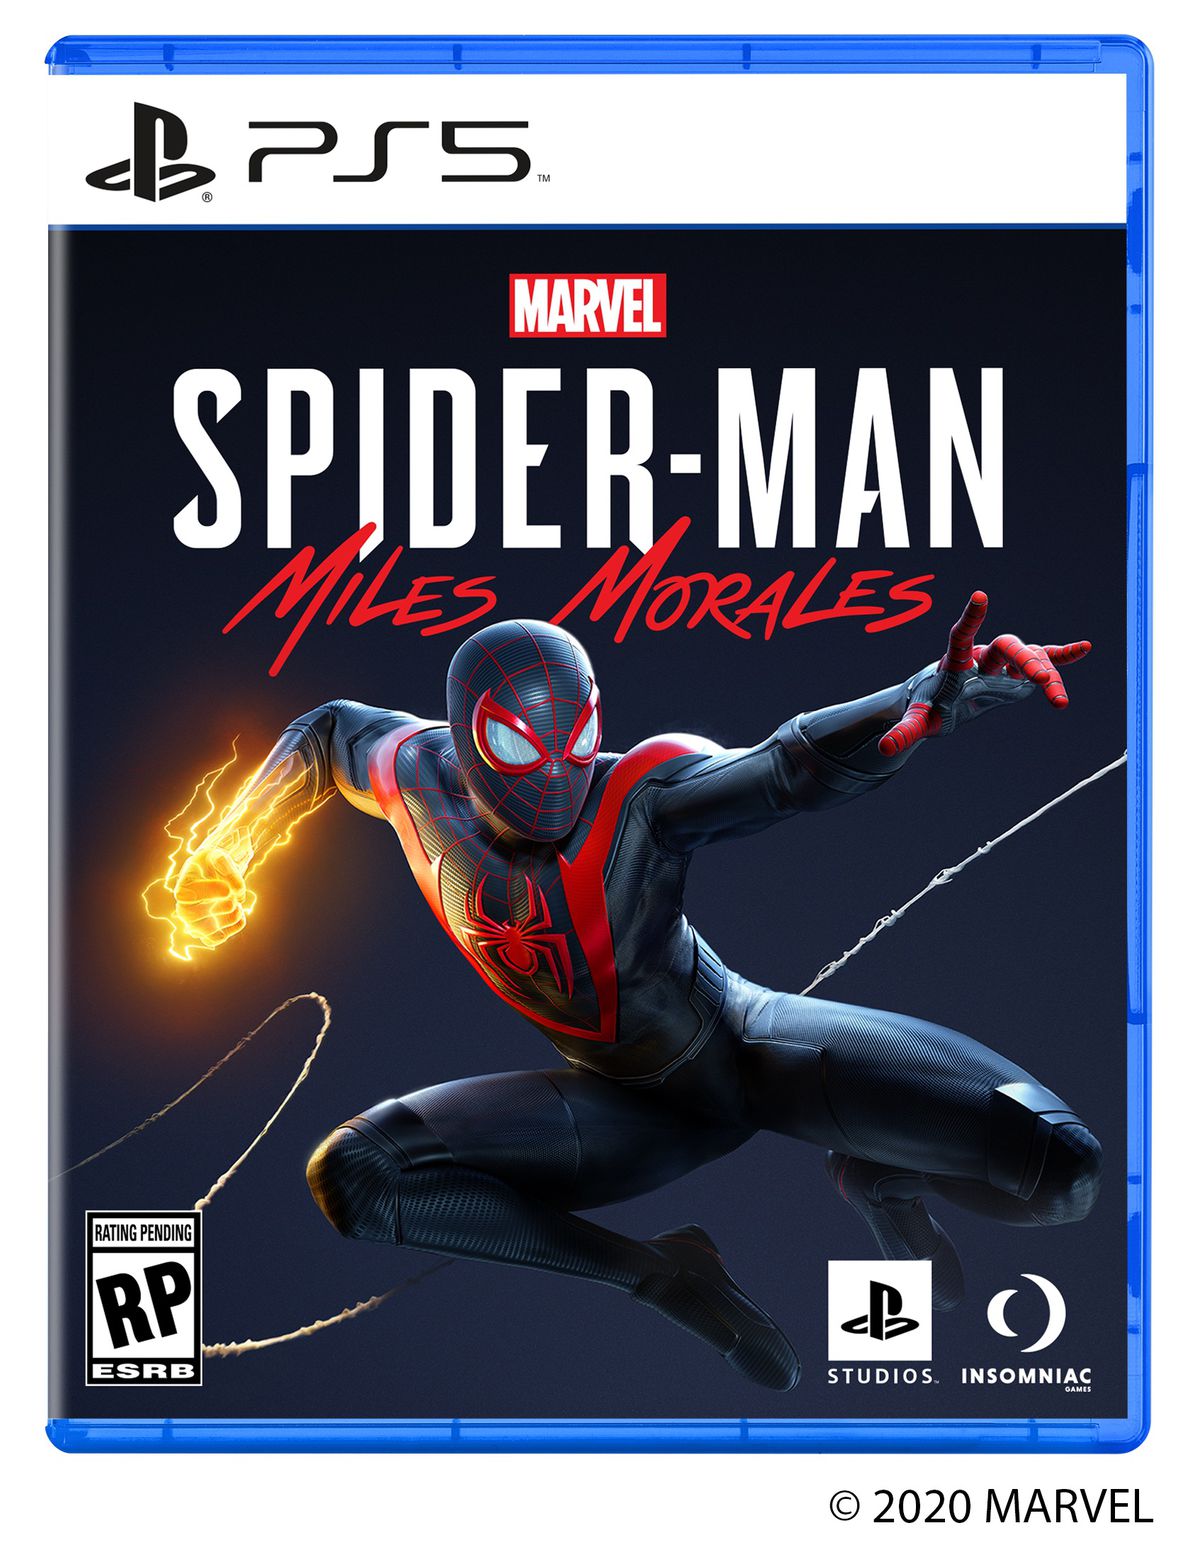 Box art for Spider-Man Miles Morales on PS5